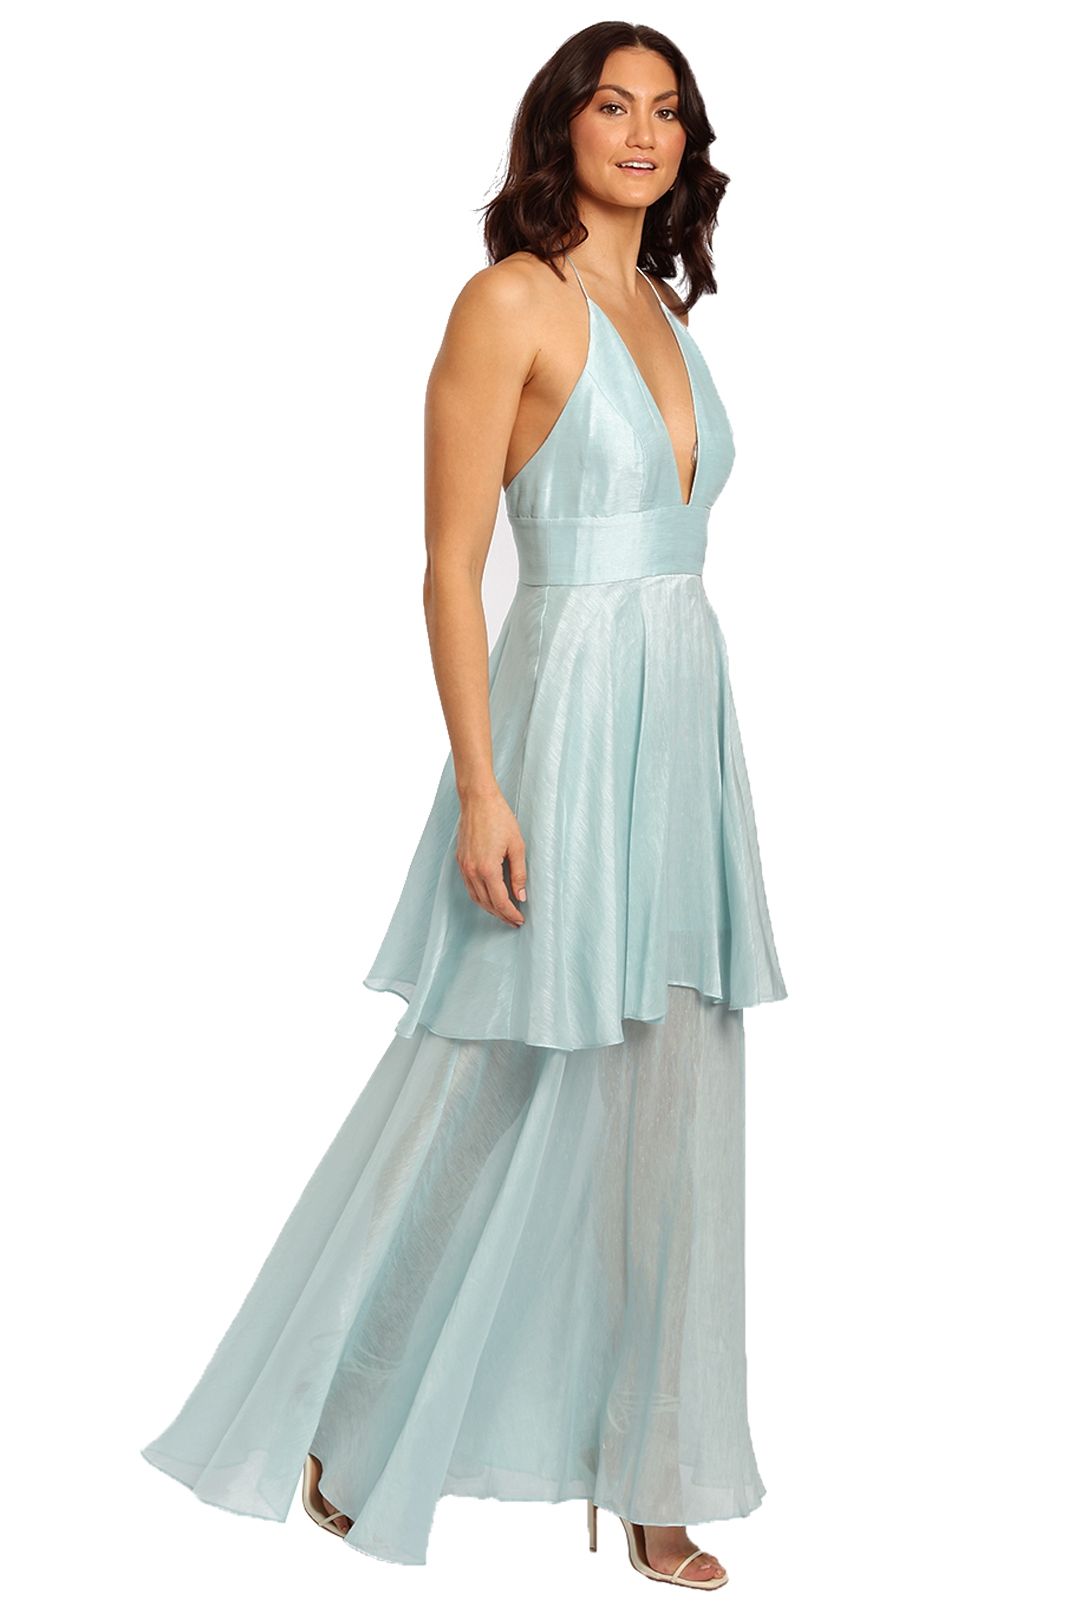 Ginger and Smart Eminence Gown Aloe Blue